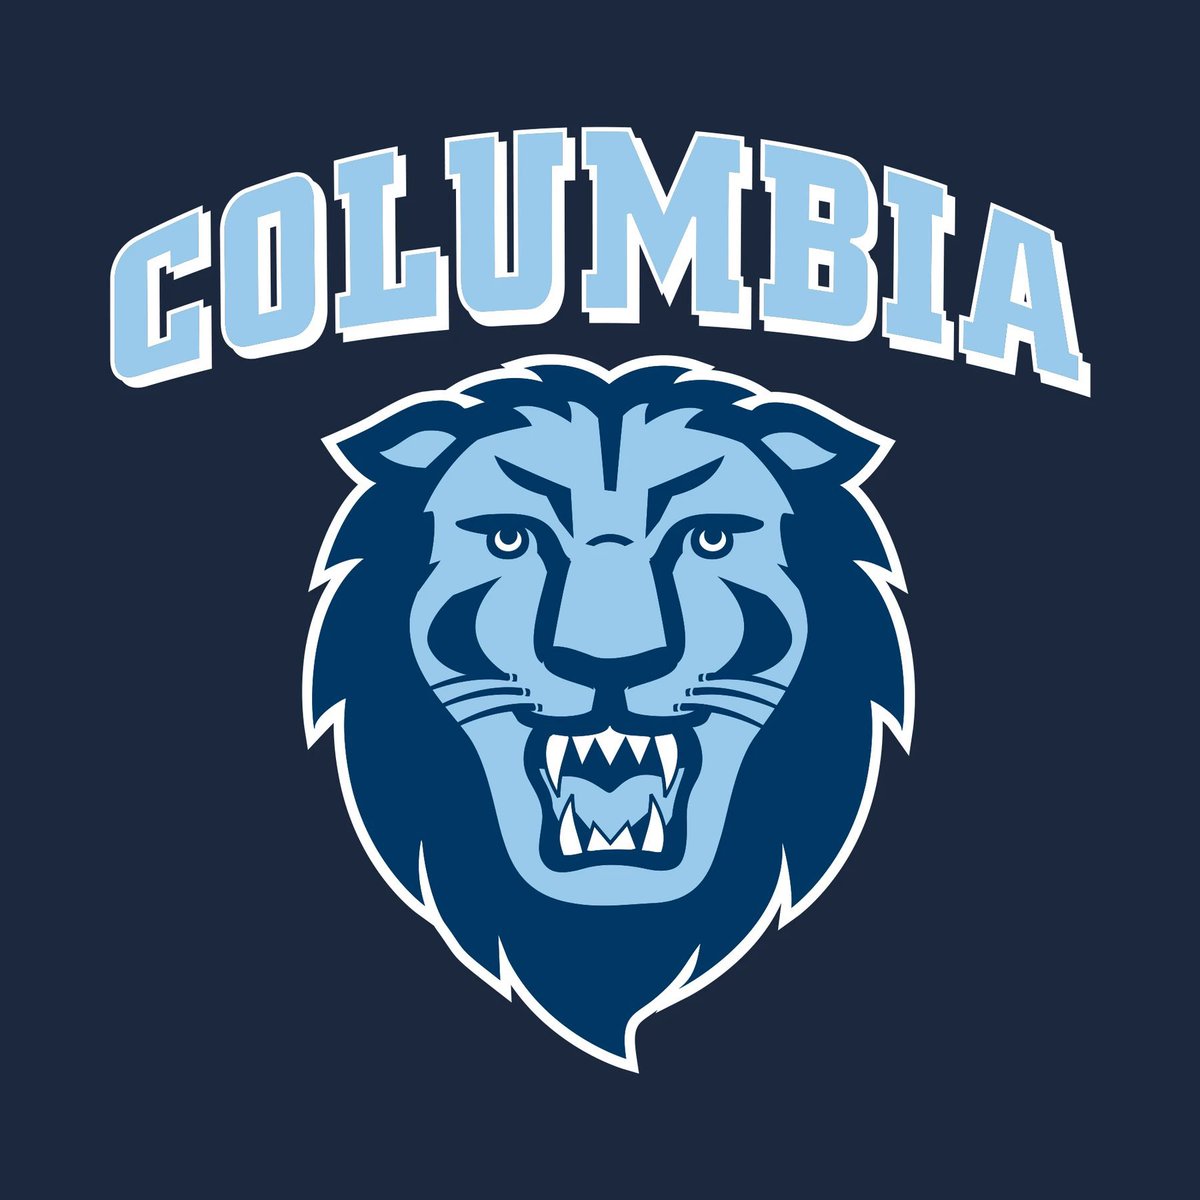 Columbia offered!! @Coach_Poppe